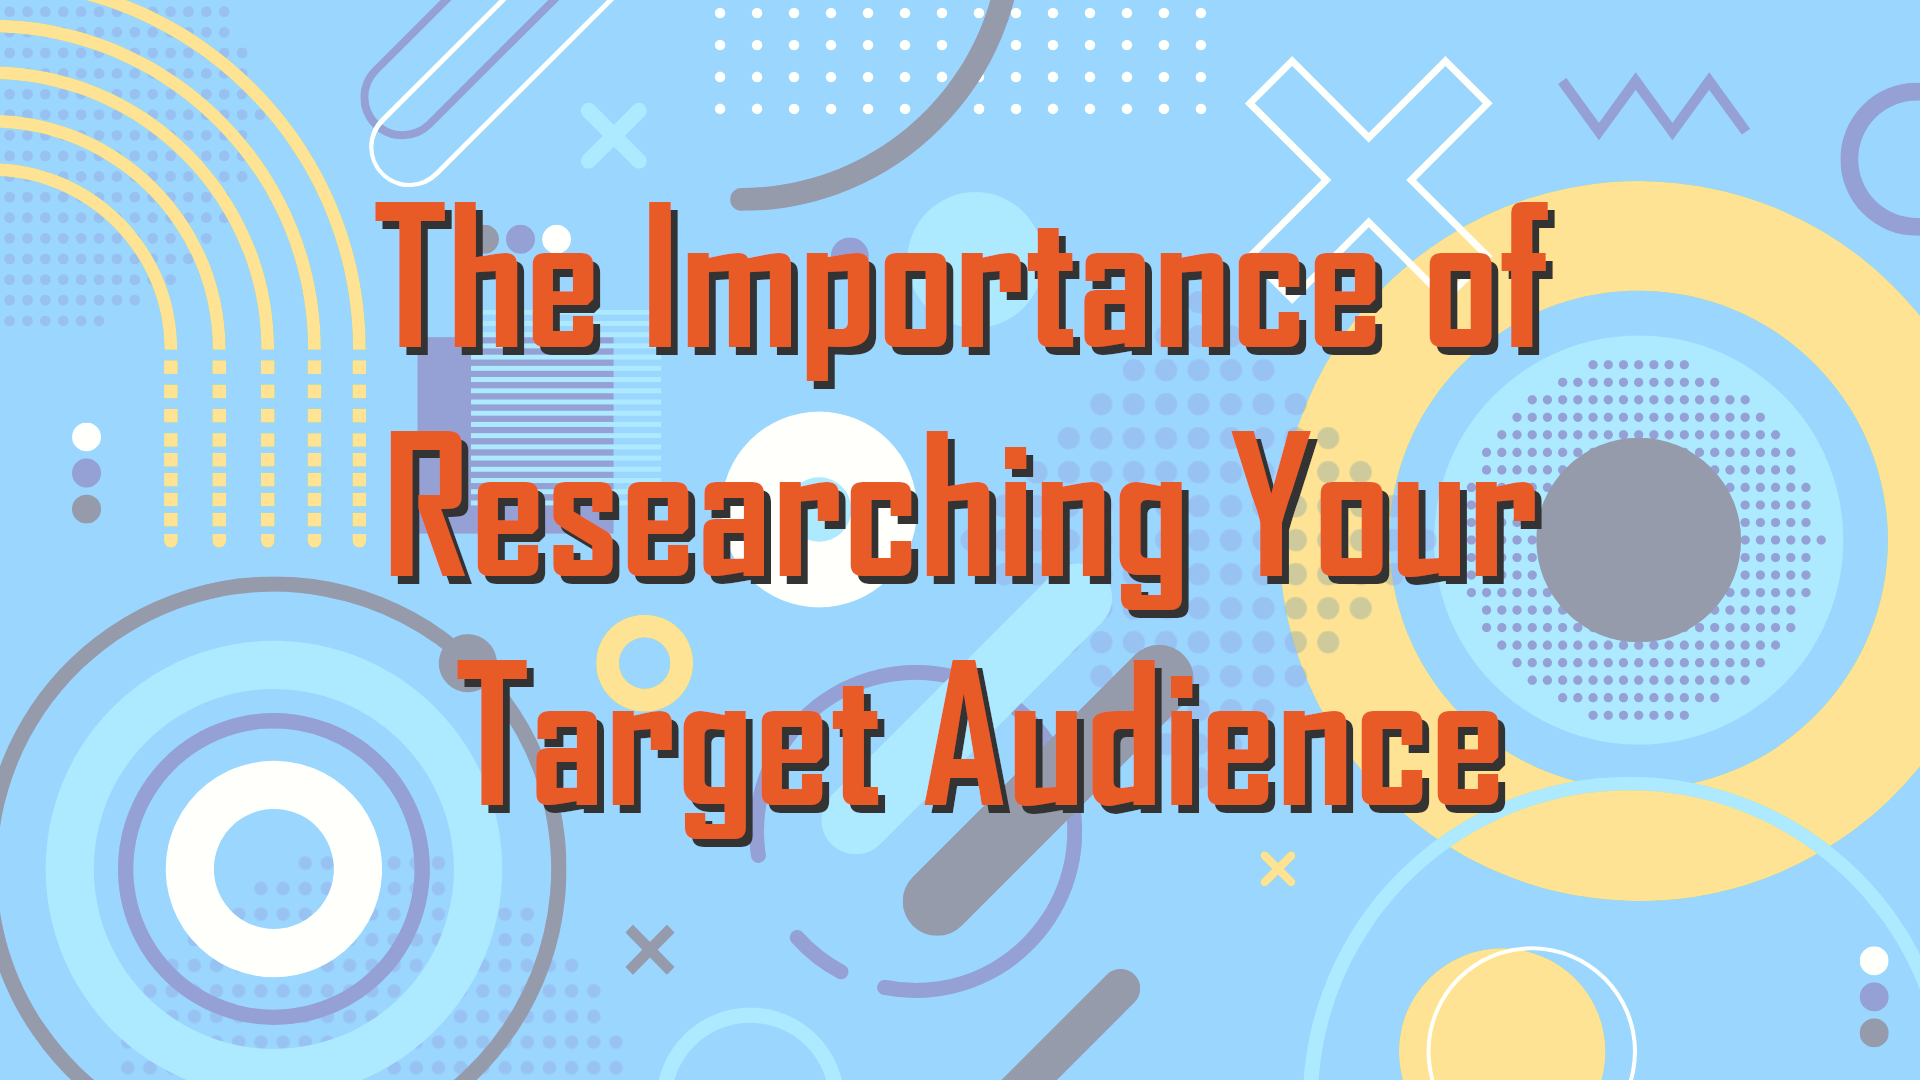 The Importance of Researching Your Target Audience